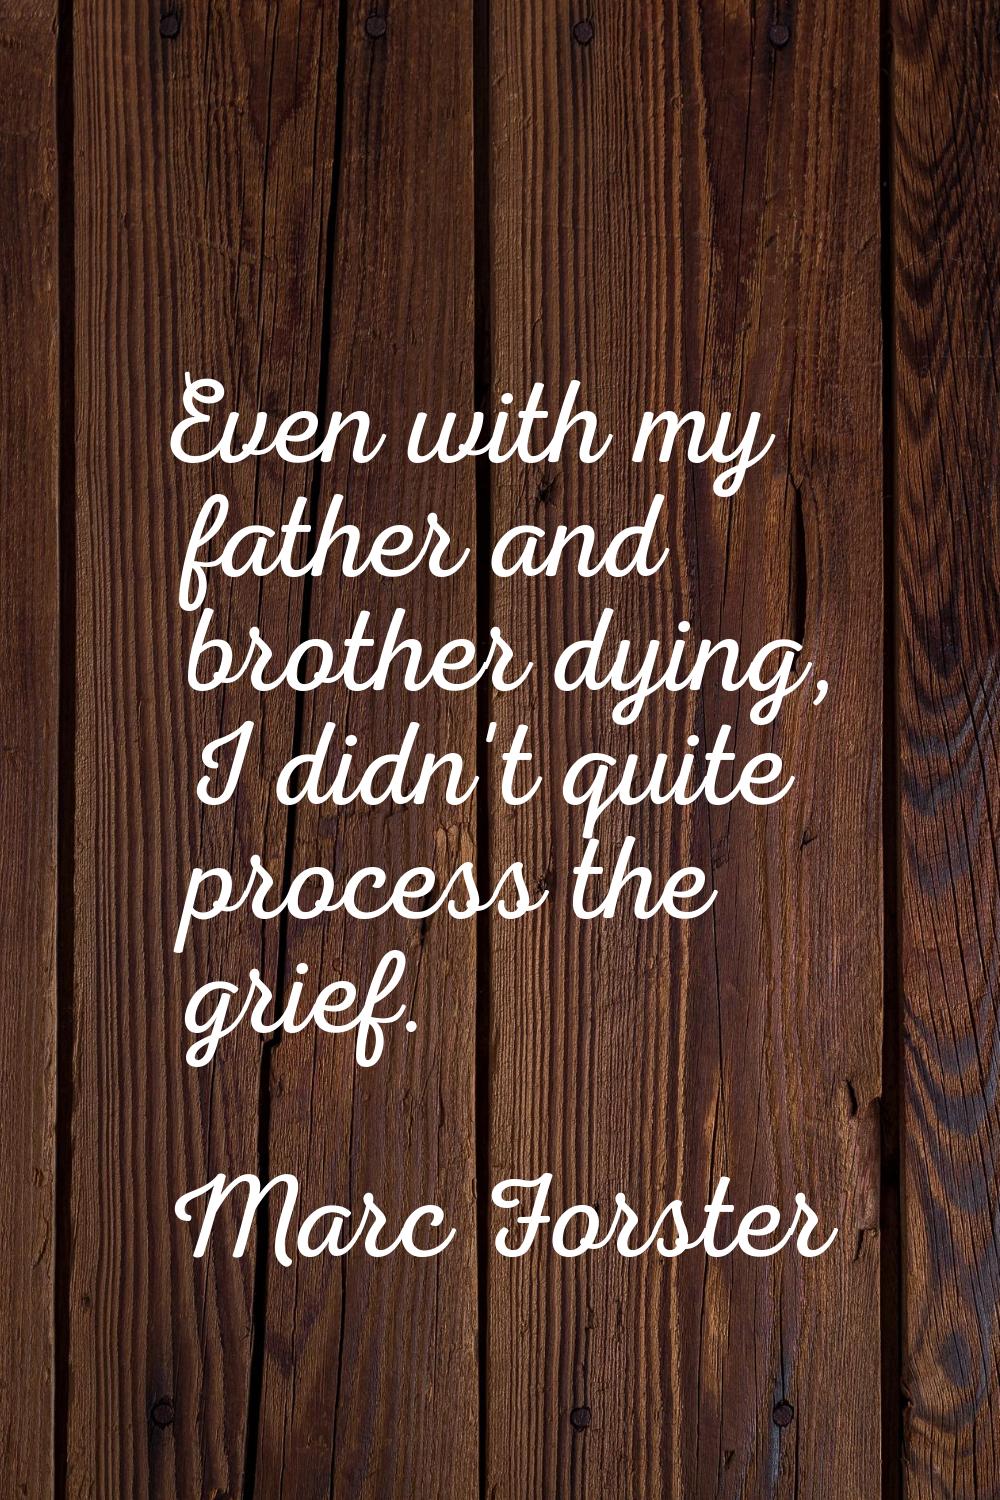 Even with my father and brother dying, I didn't quite process the grief.